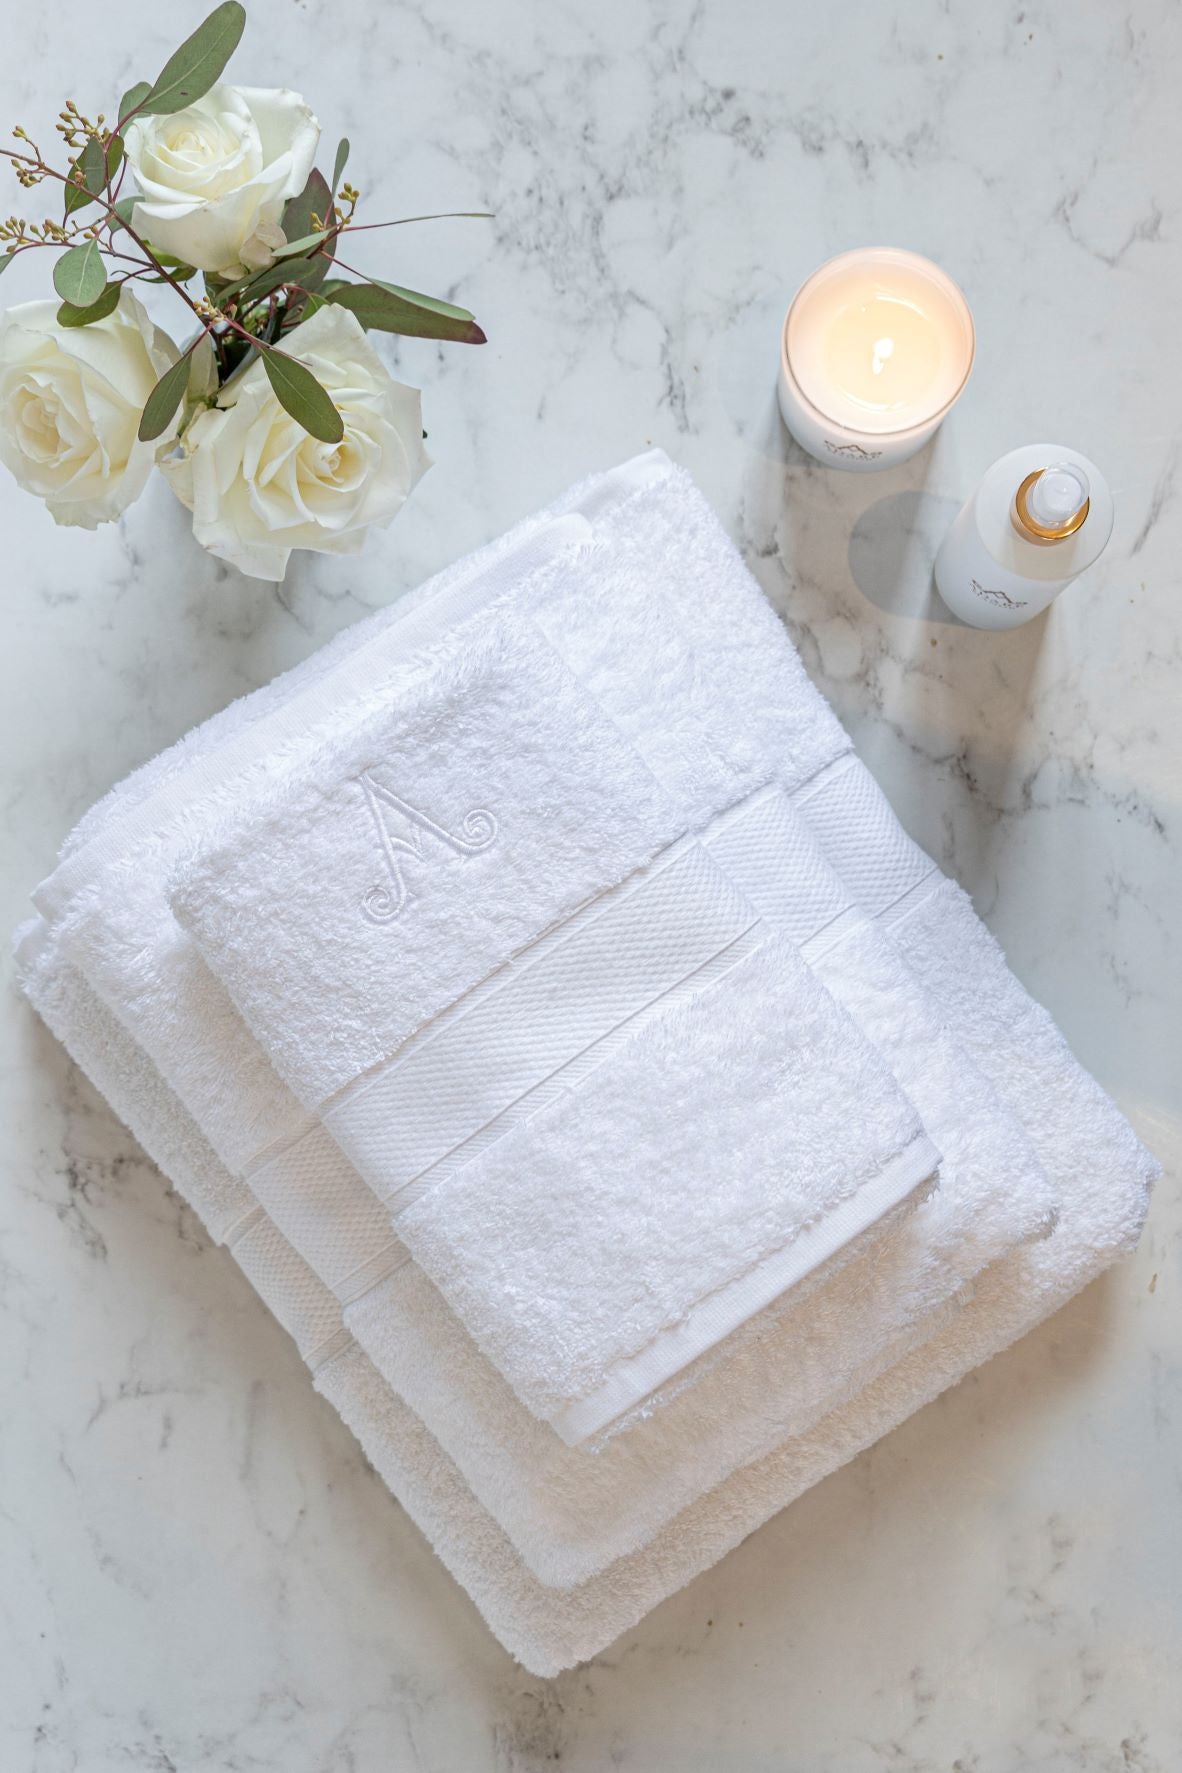 Adare Manor Embroidered Towels